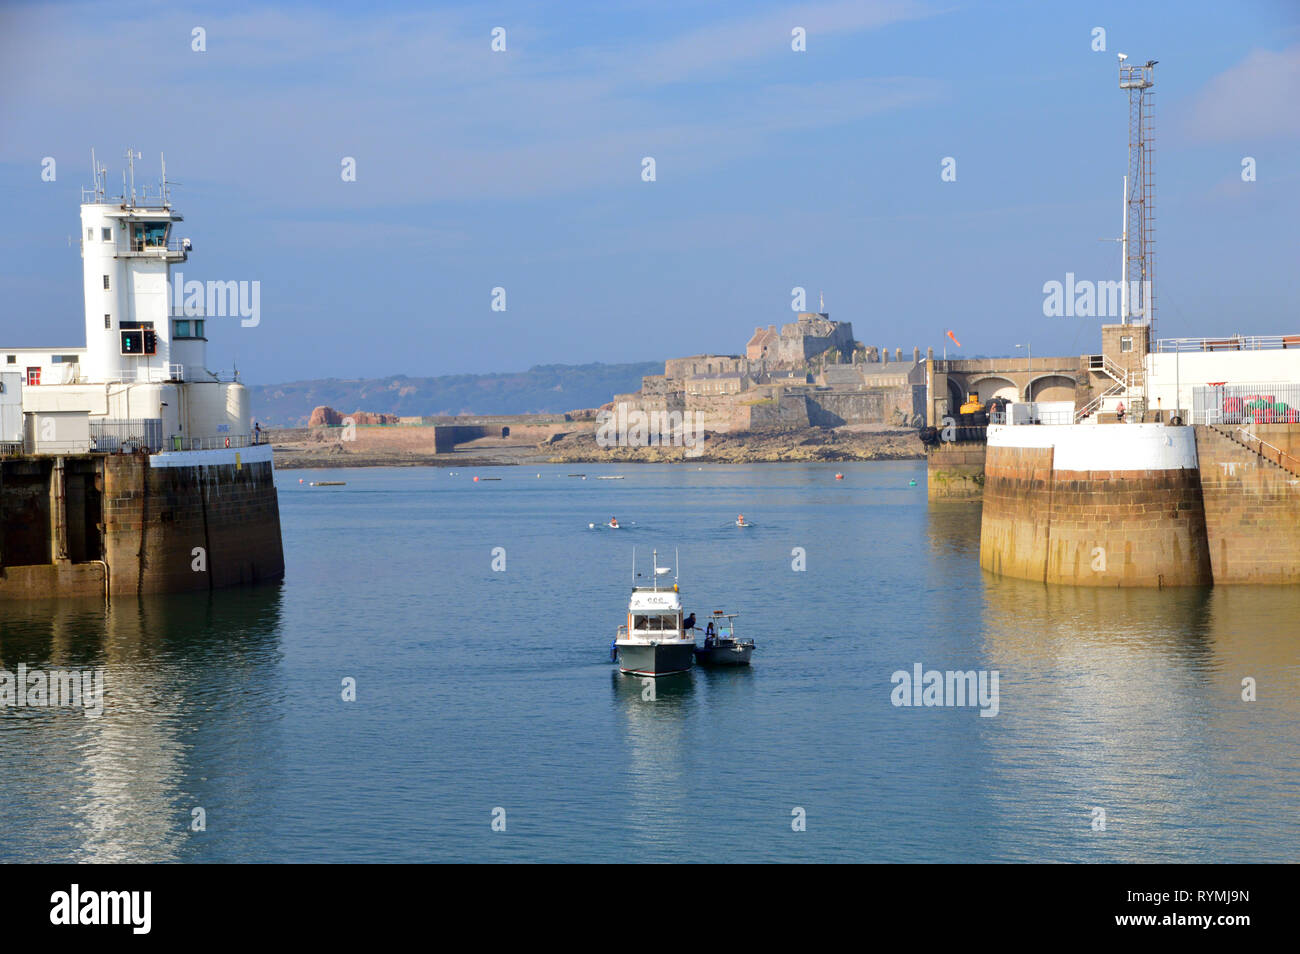 Fishing Boat Entering the Old Harbour in St Helier, Island of Jersey, Channel Isles, UK. Stock Photo